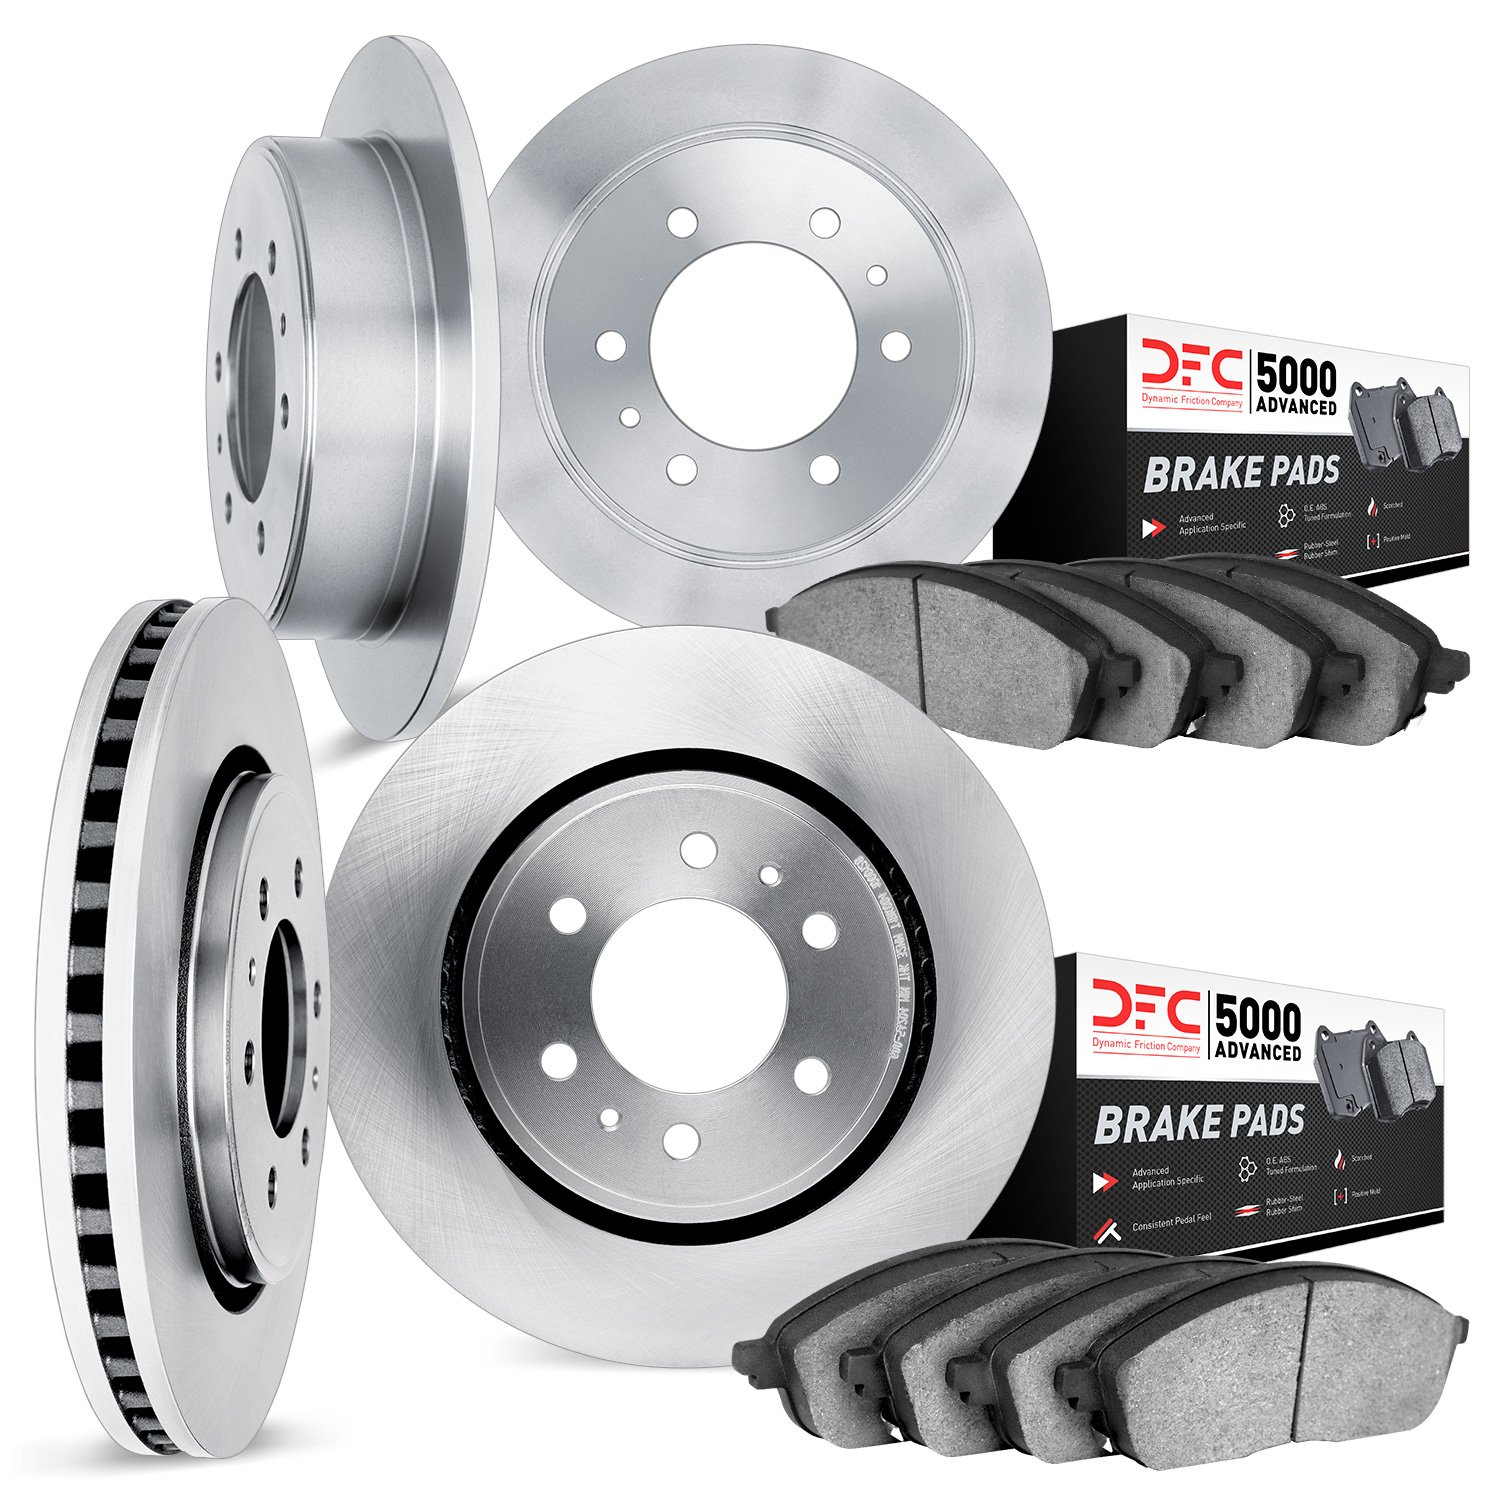 6504-37017 Brake Rotors w/5000 Advanced Brake Pads Kit, 1988-1995 GM, Position: Front and Rear